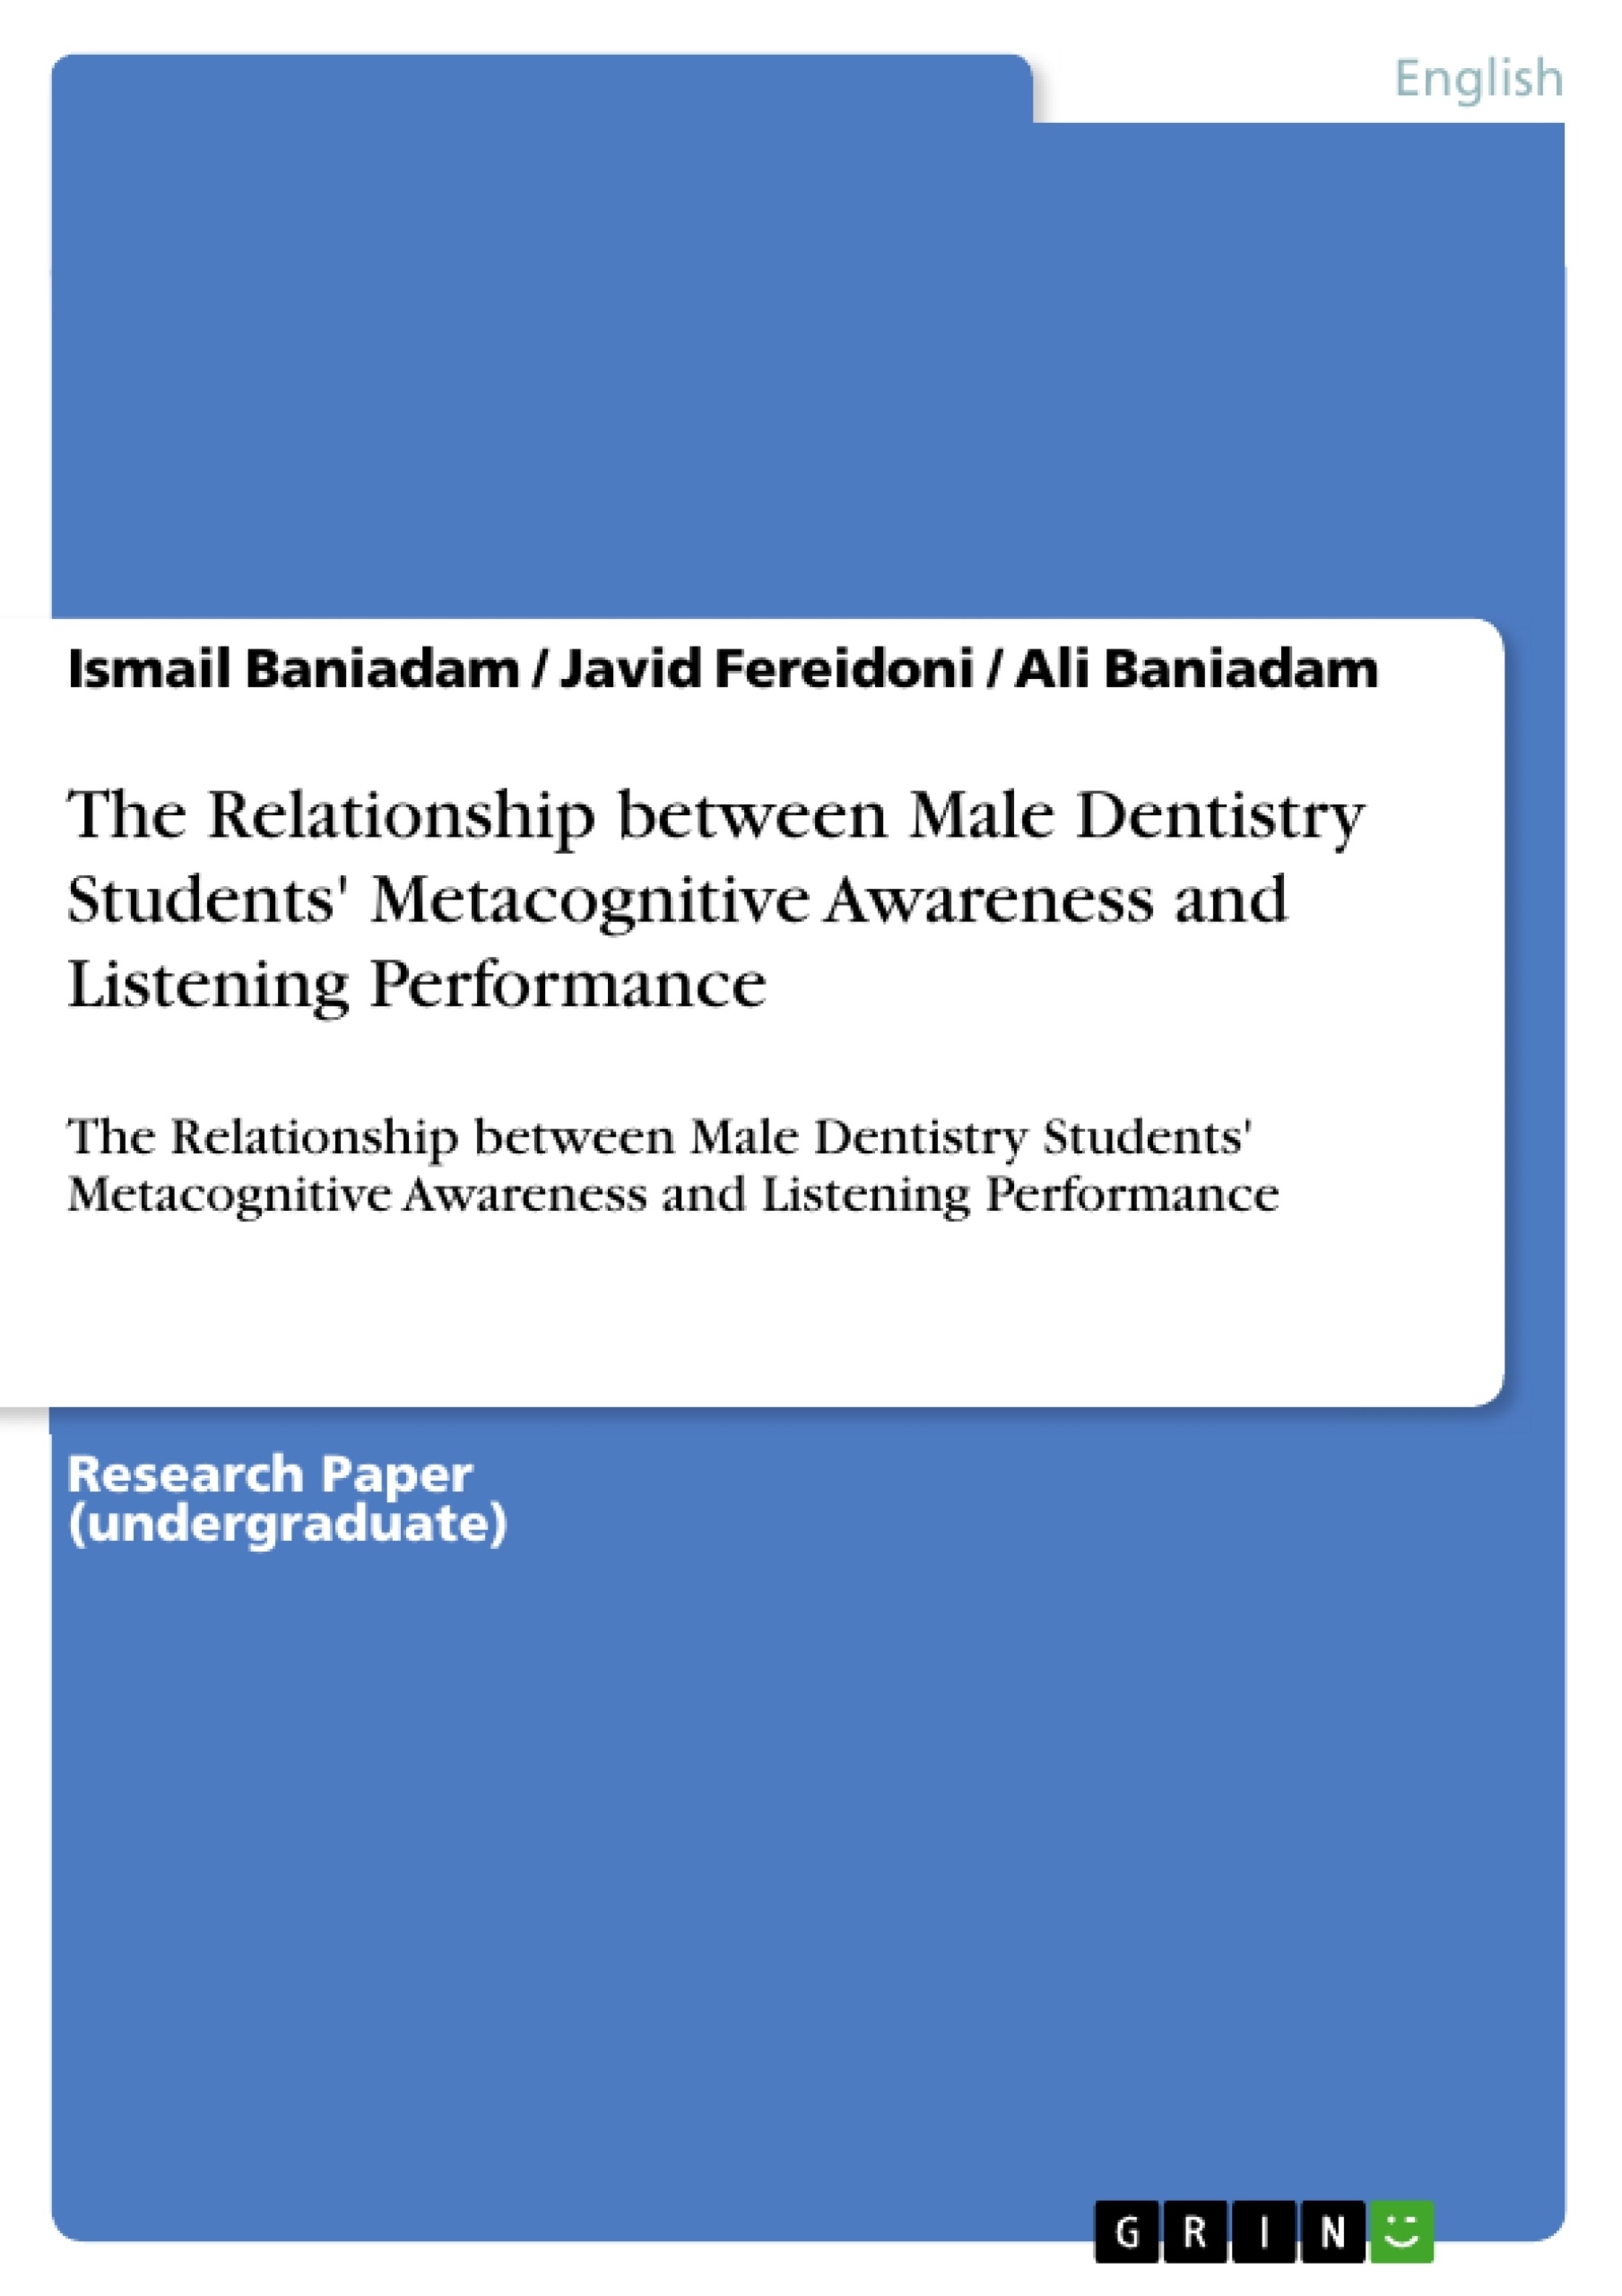 Título: The Relationship between Male Dentistry Students' Metacognitive Awareness and Listening Performance